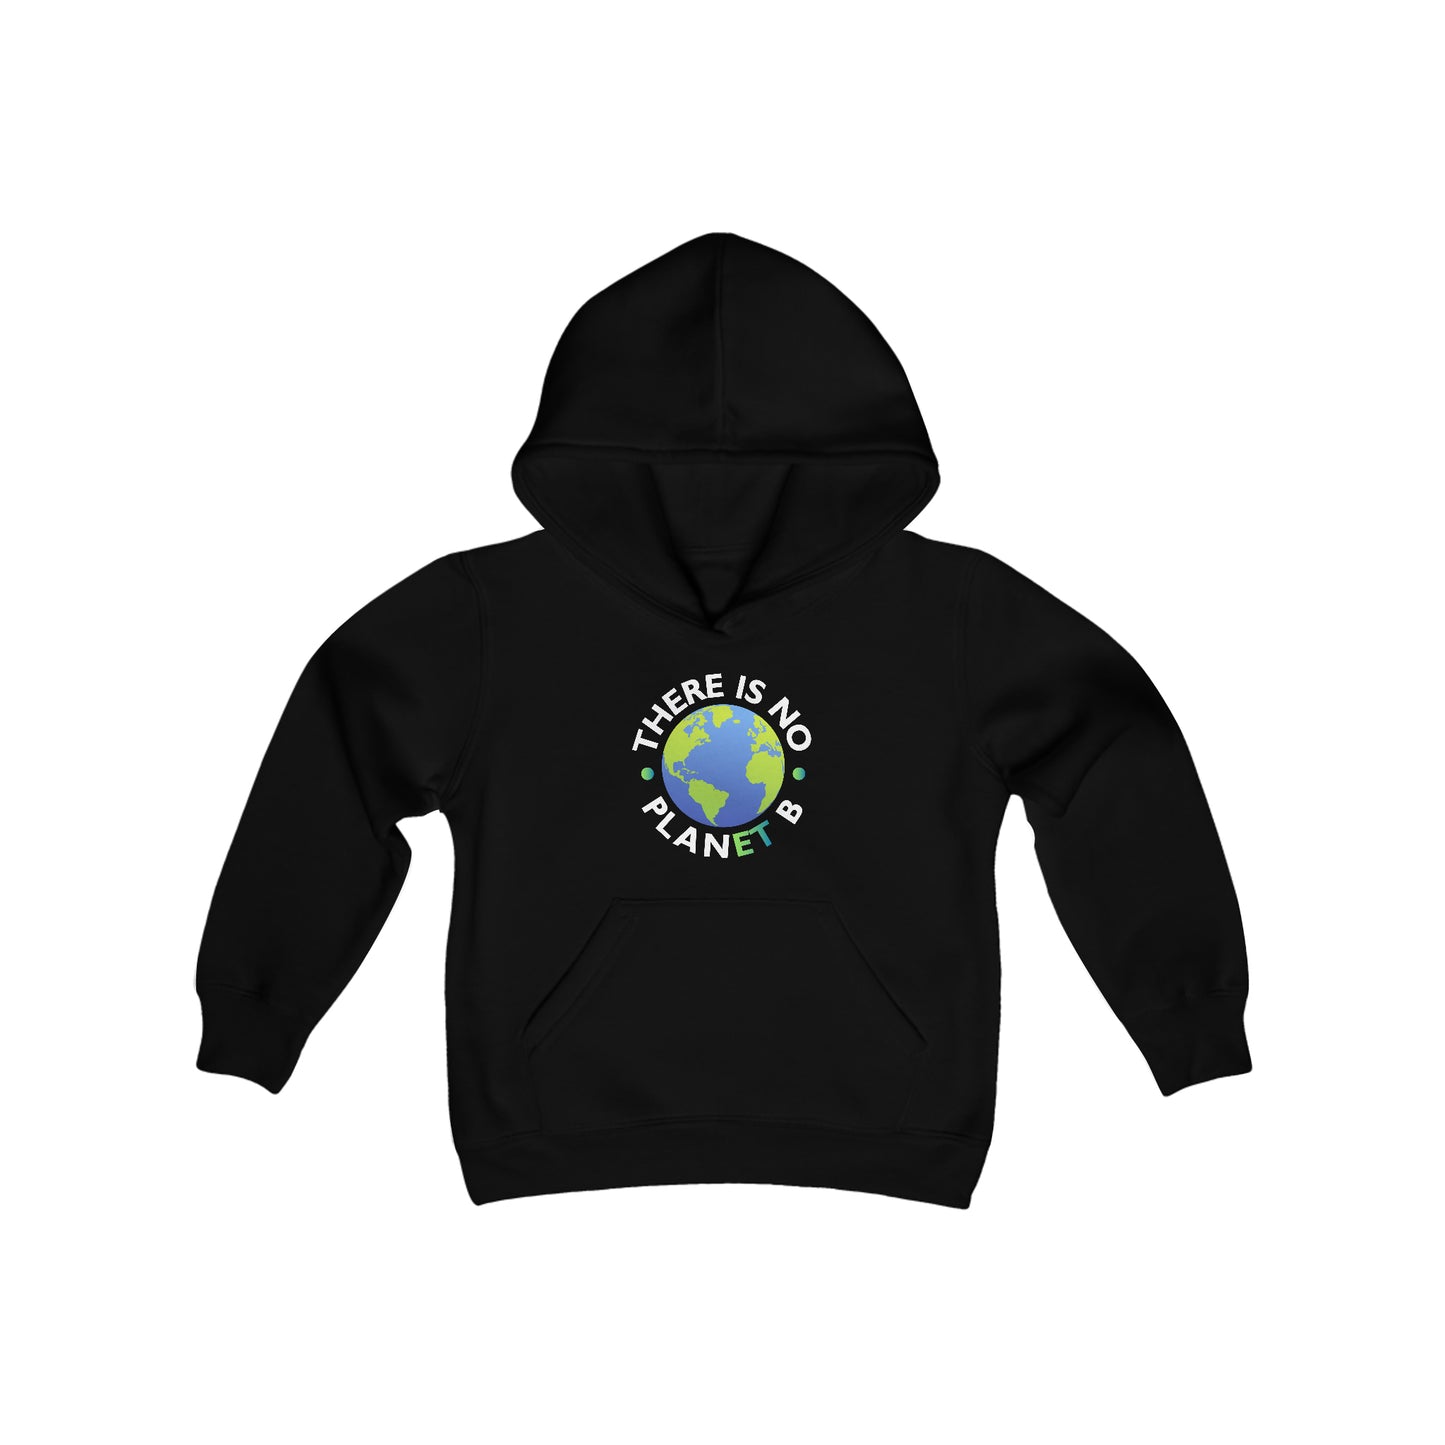 “There Is No Planet B” Youth Hoodie